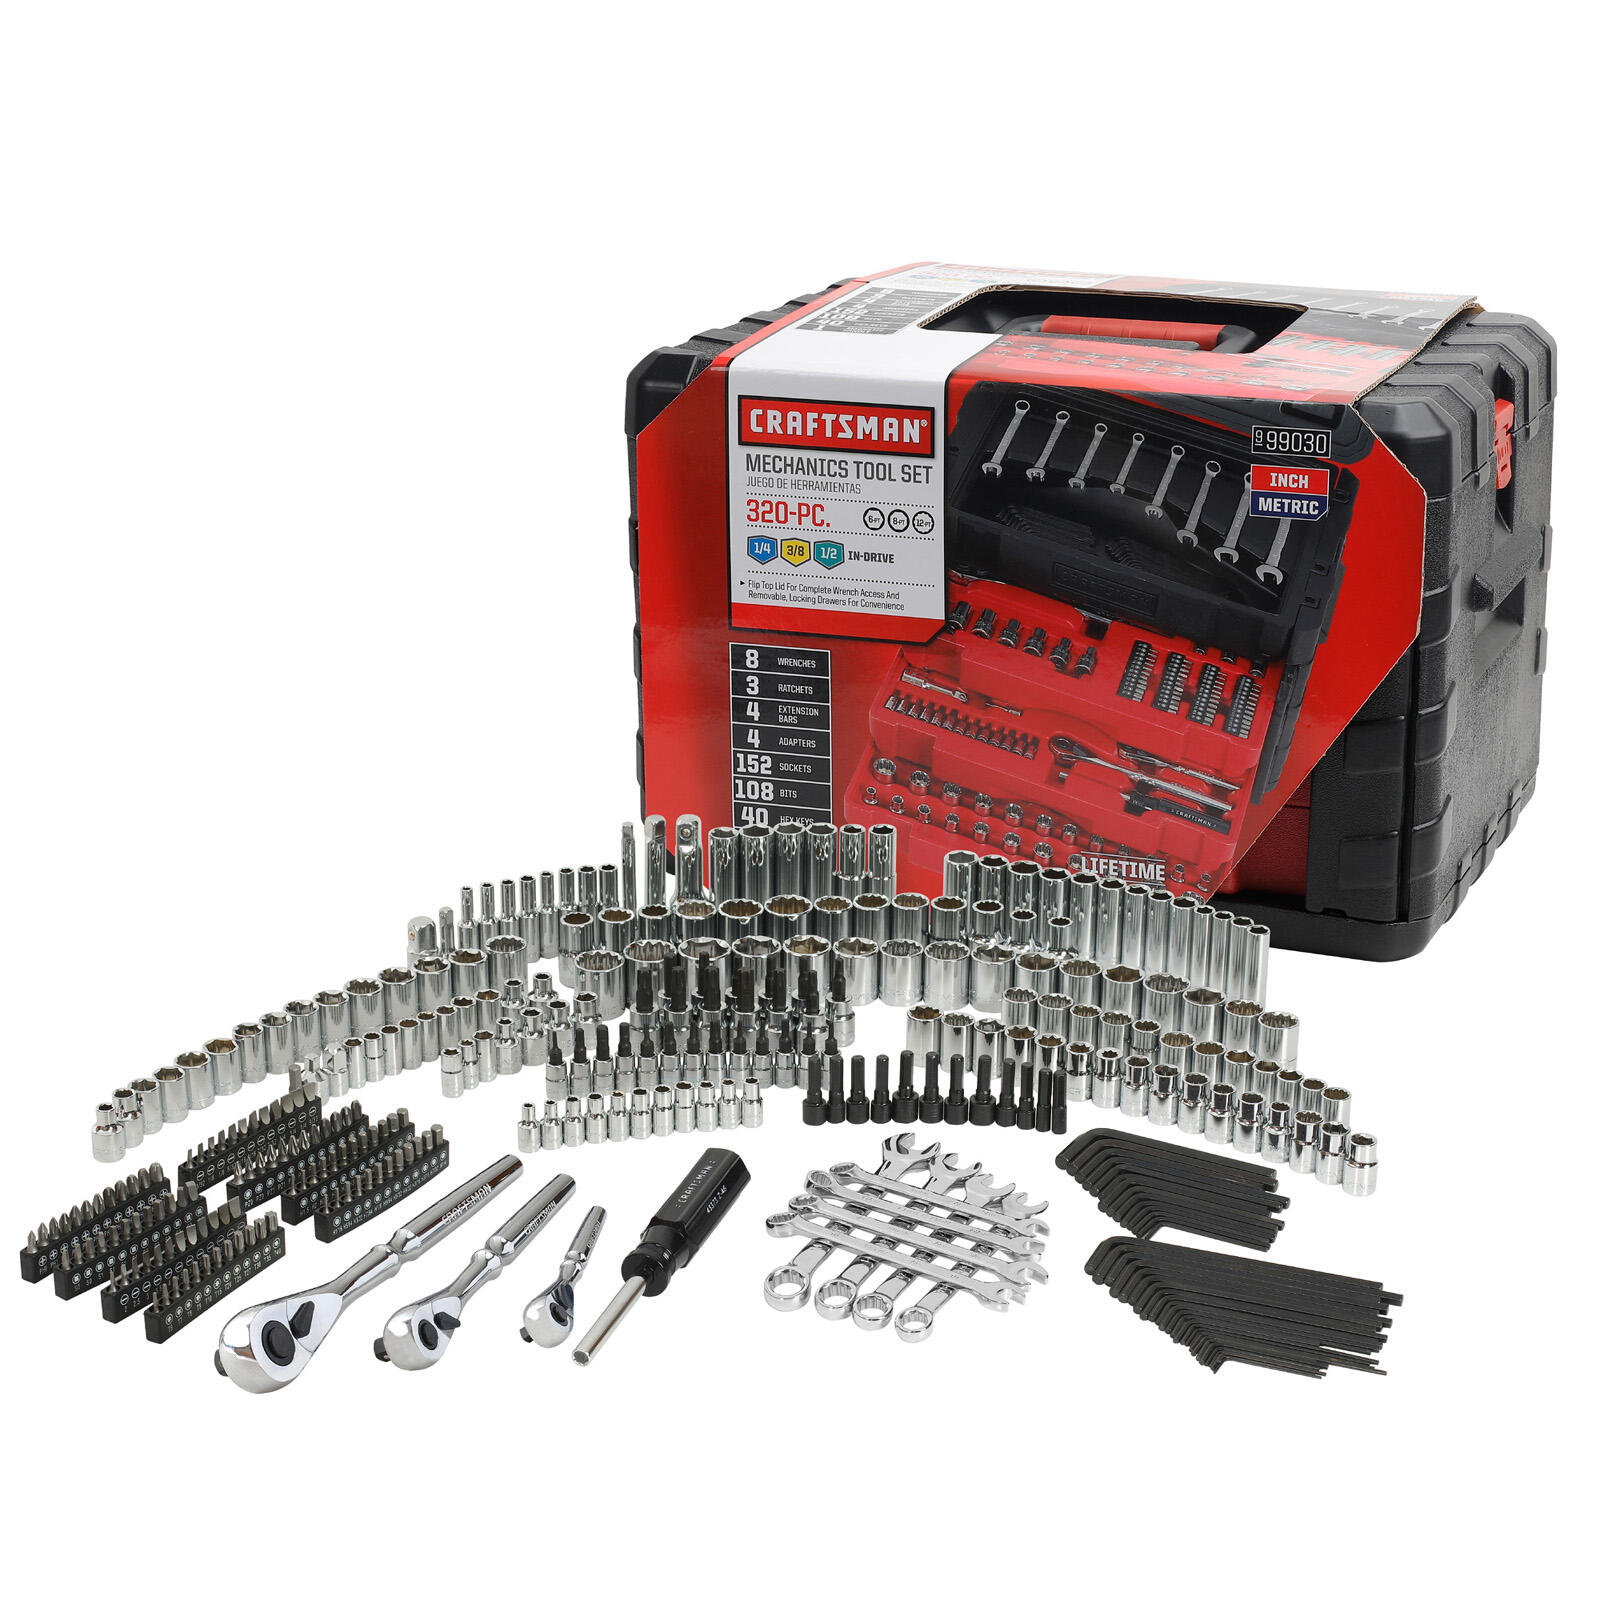 What Does The 320-Piece Craftsman Mechanic Tool Chest Include?